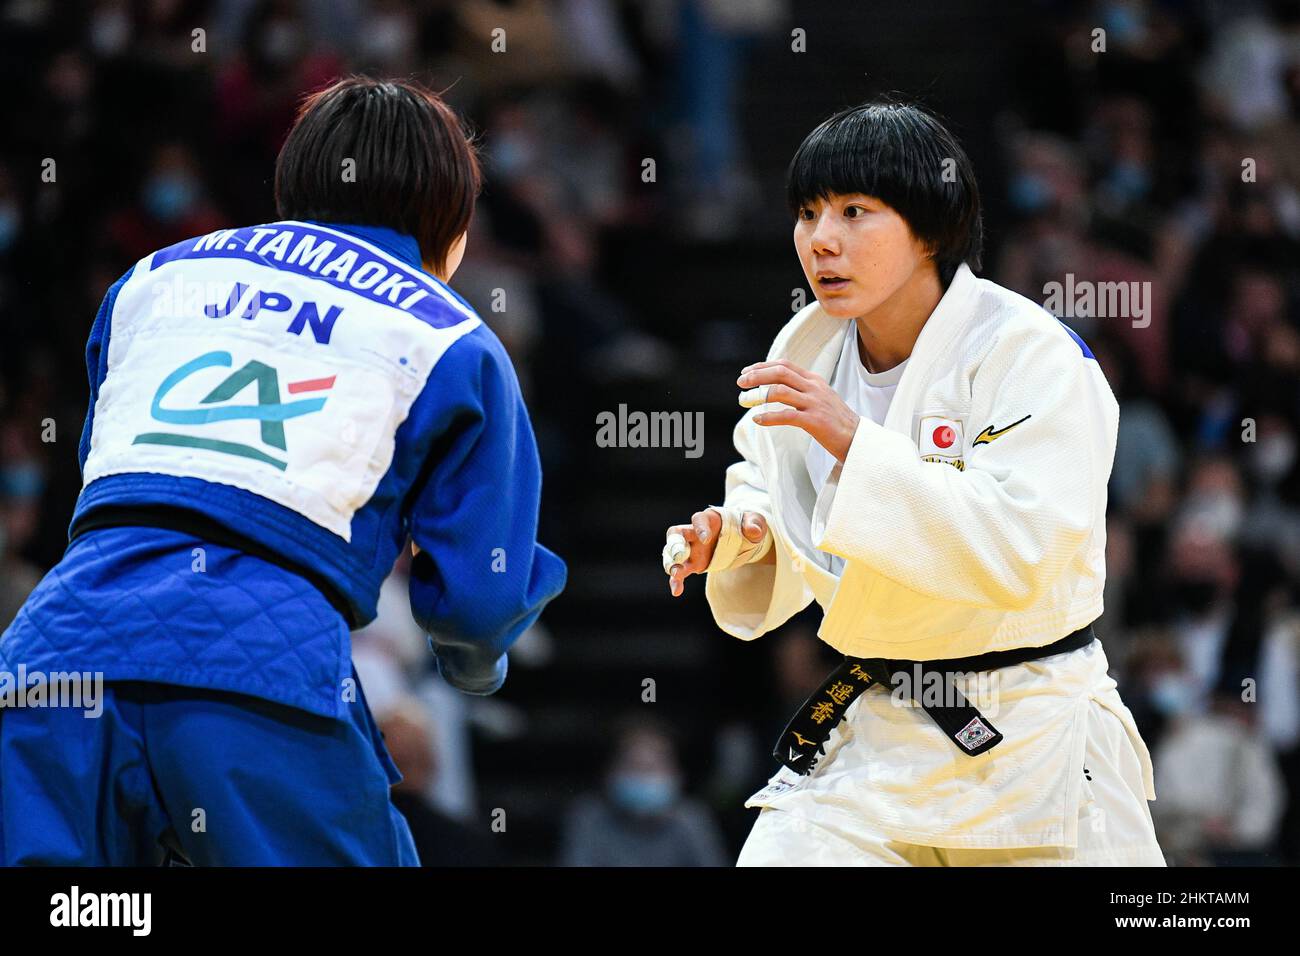 Women's -57 kg, Haruka Funakubo of Japan (gold medal) competes during the Paris Grand Slam 2022, IJF World Judo Tour on February 5, 2022 at Accor Arena in Paris, France - Photo Victor Joly / DPPI Stock Photo